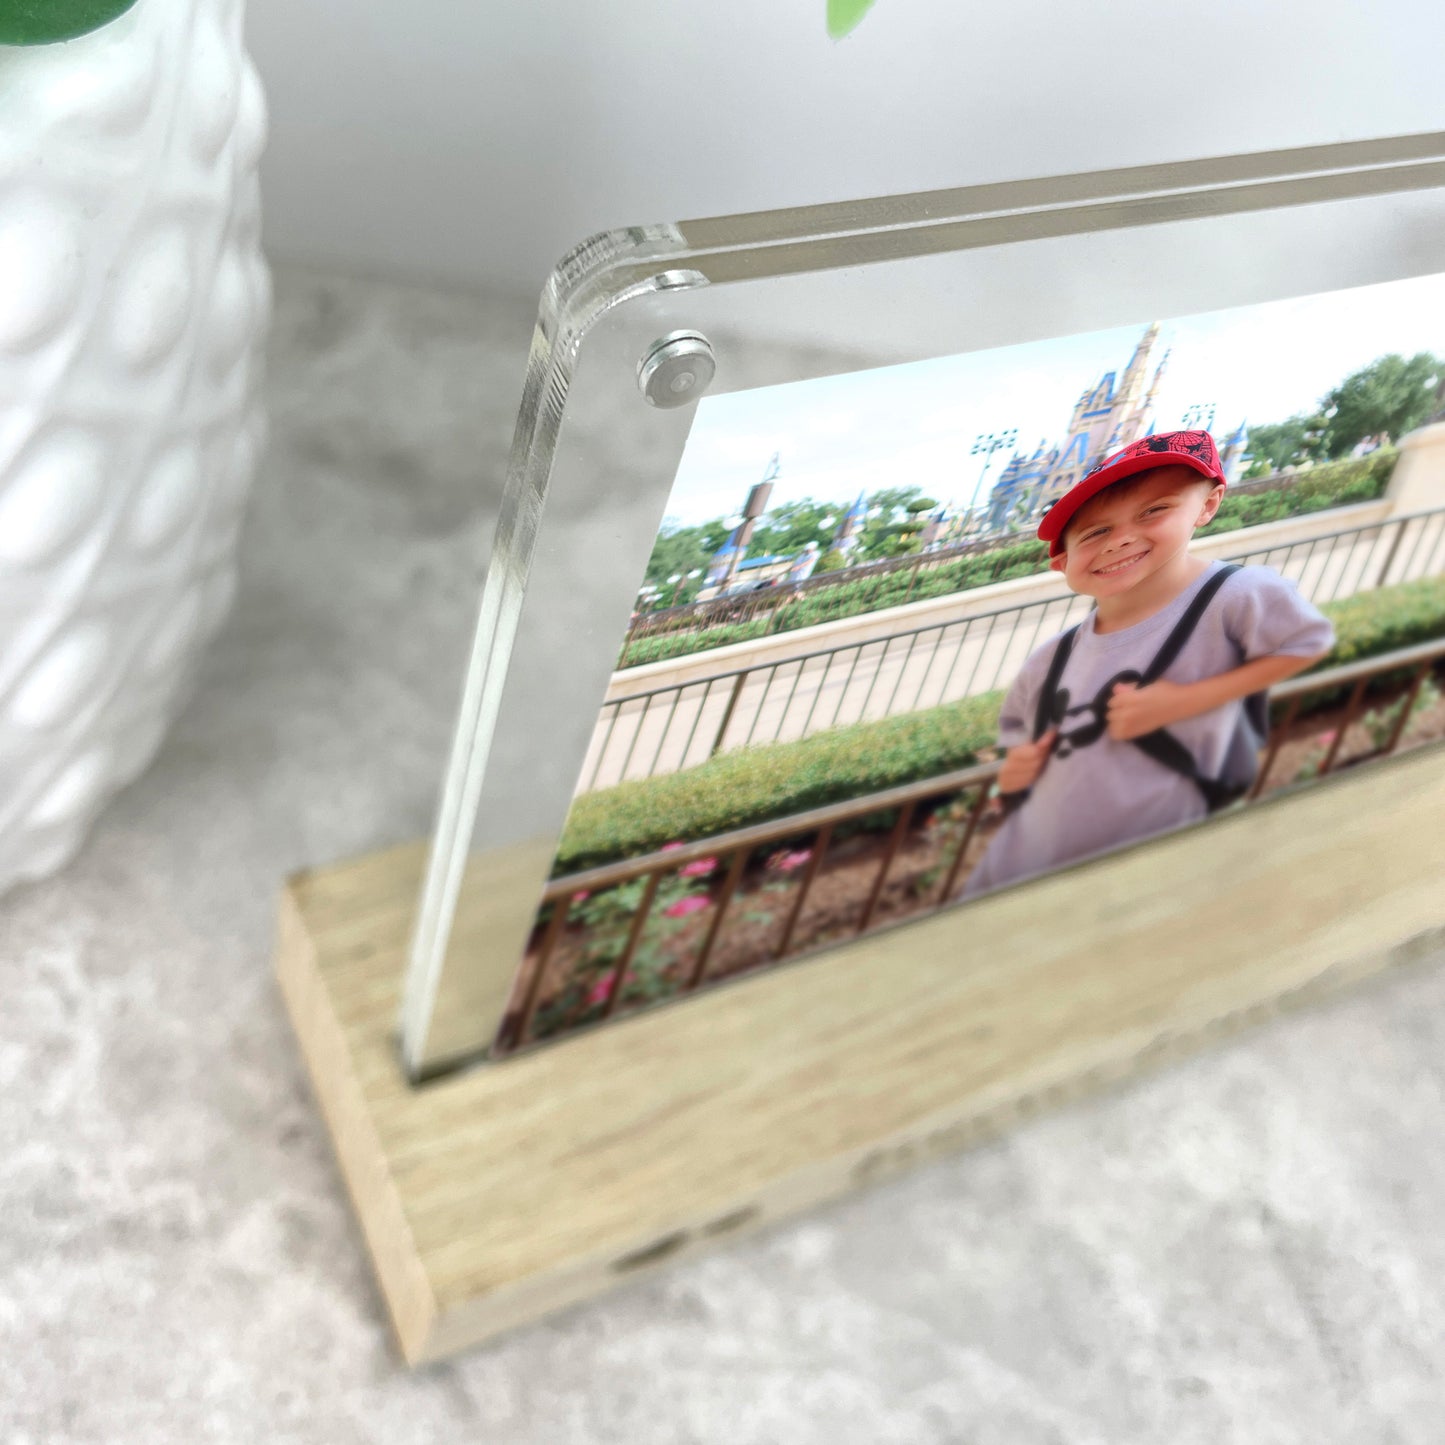 Personalised Any Custom Text Wooden Base 6x4" Photo Frame